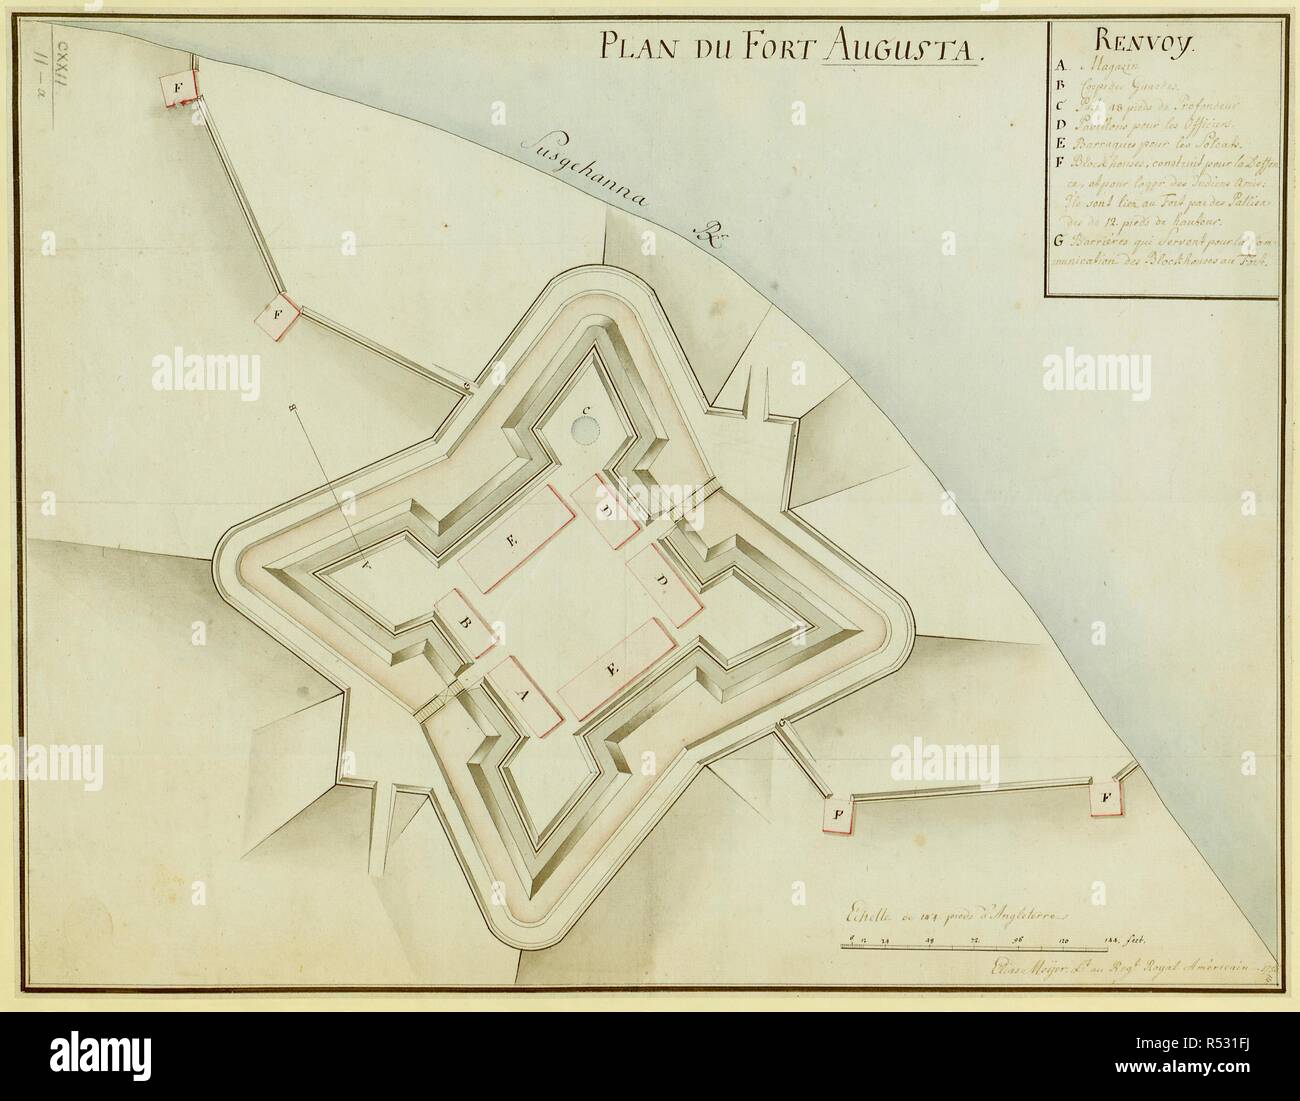 A plan of Fort Augusta, Pennsylvania . PLAN DU FORT AUGUSTA. [Fort Augusta?] : Elias Meyer Reg.t au Royal AmÃ©ricain, 1756. Source: Maps K.Top.122.11.a. Language: French. Stock Photo